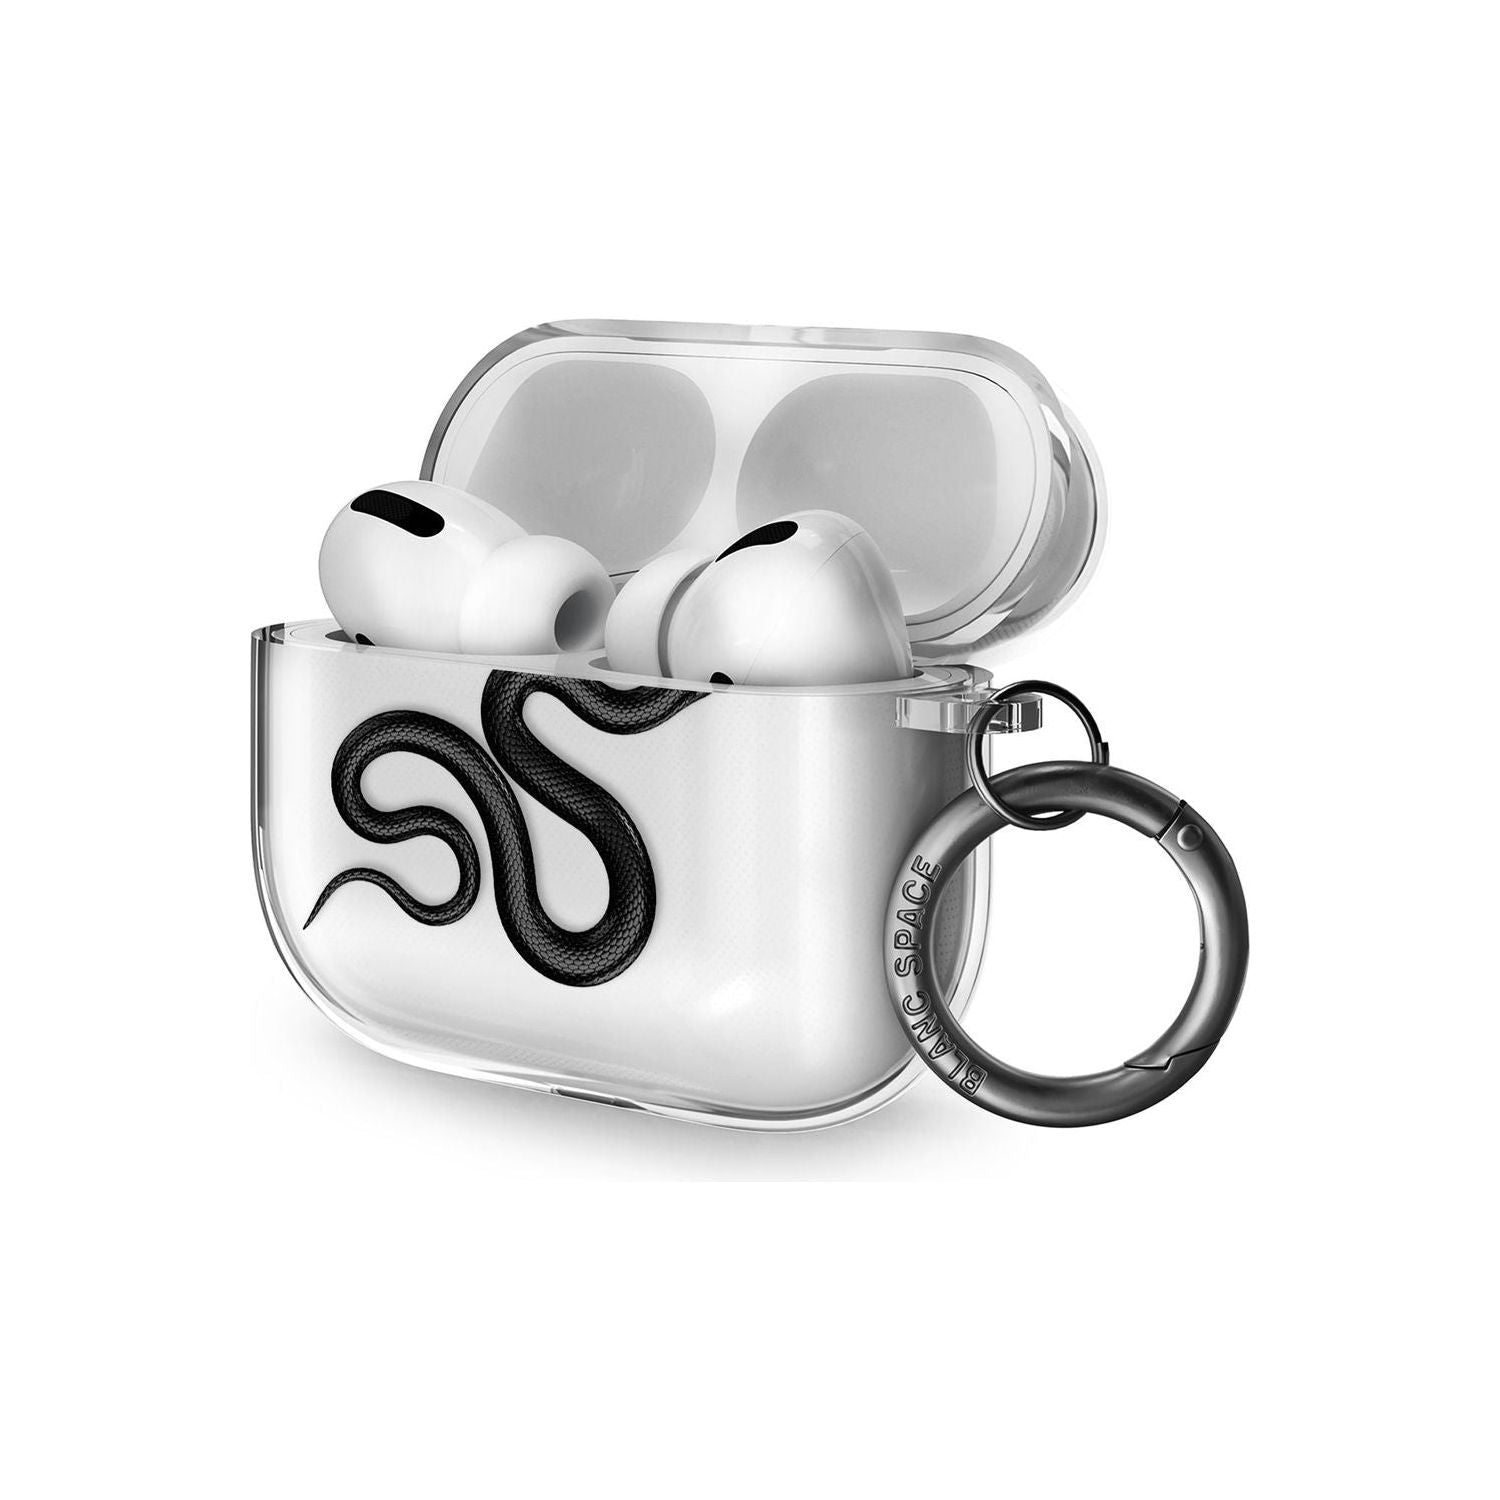 Snakes AirPods Pro Case